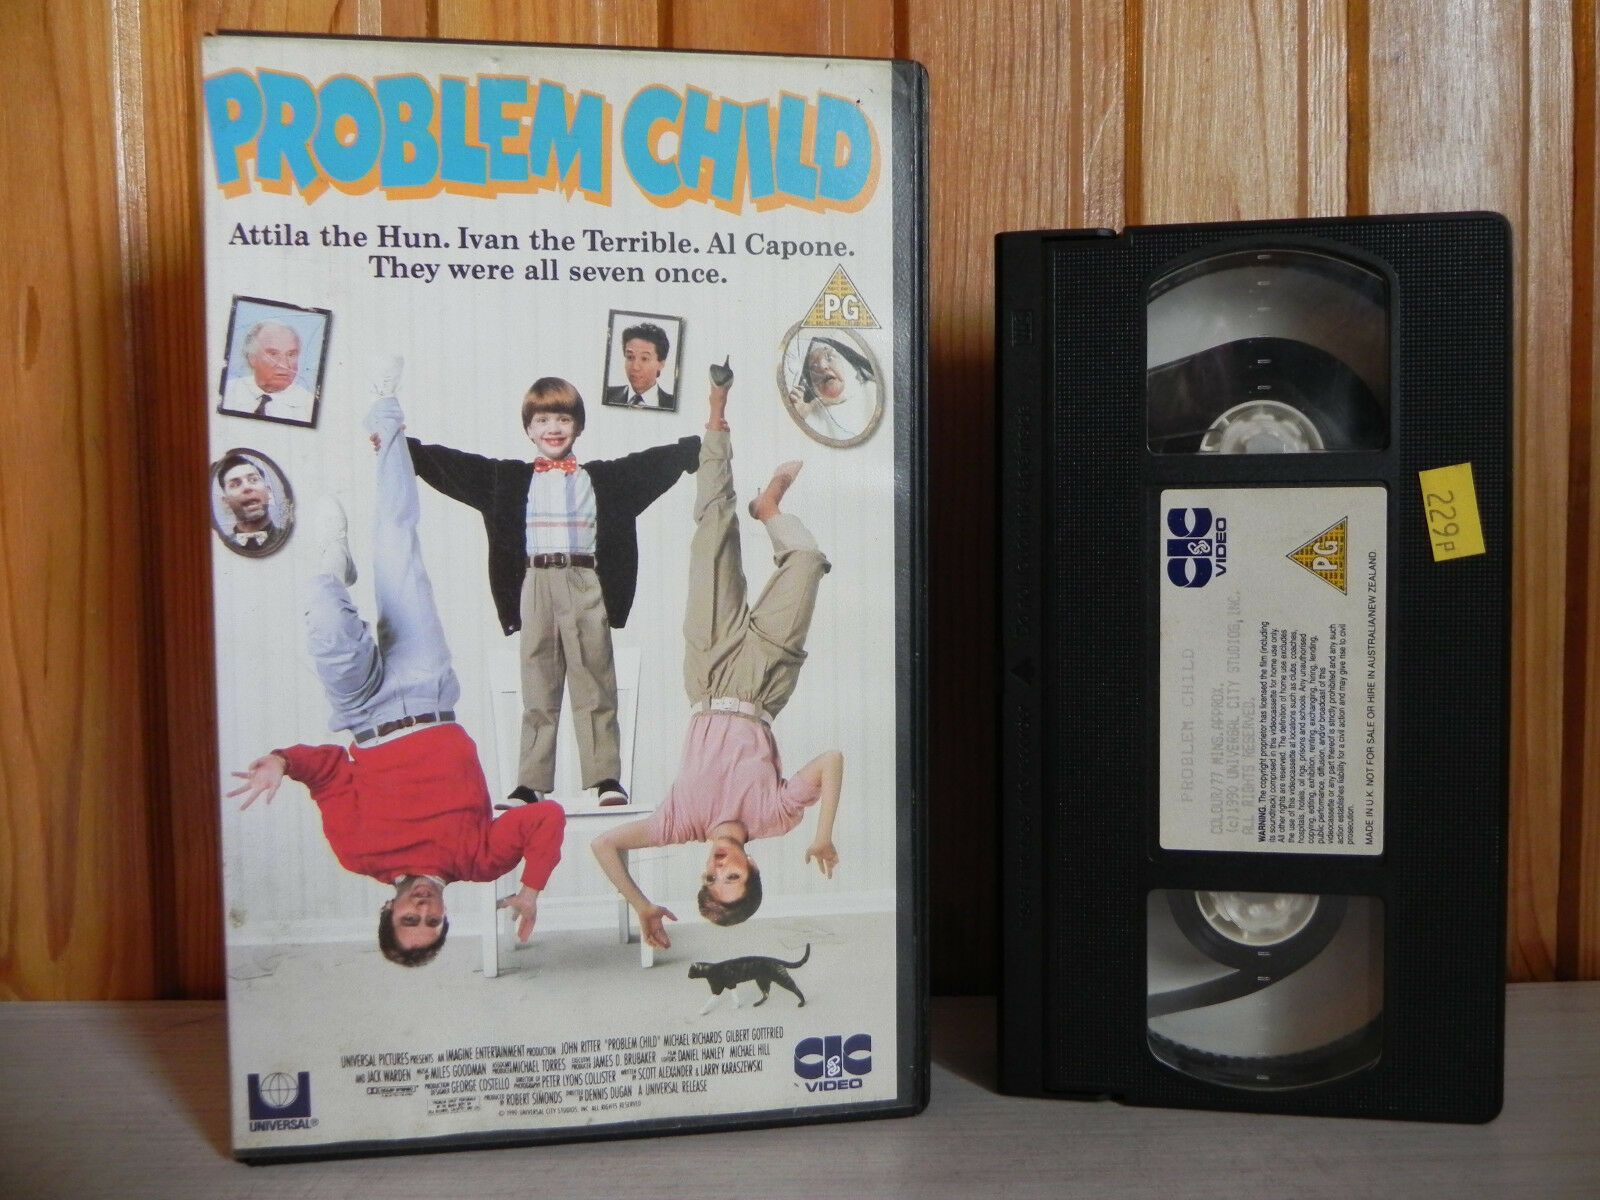 Problem Child - CIC Video - Hilarious Comedy - John Ritter - Amy Yasbeck - VHS-